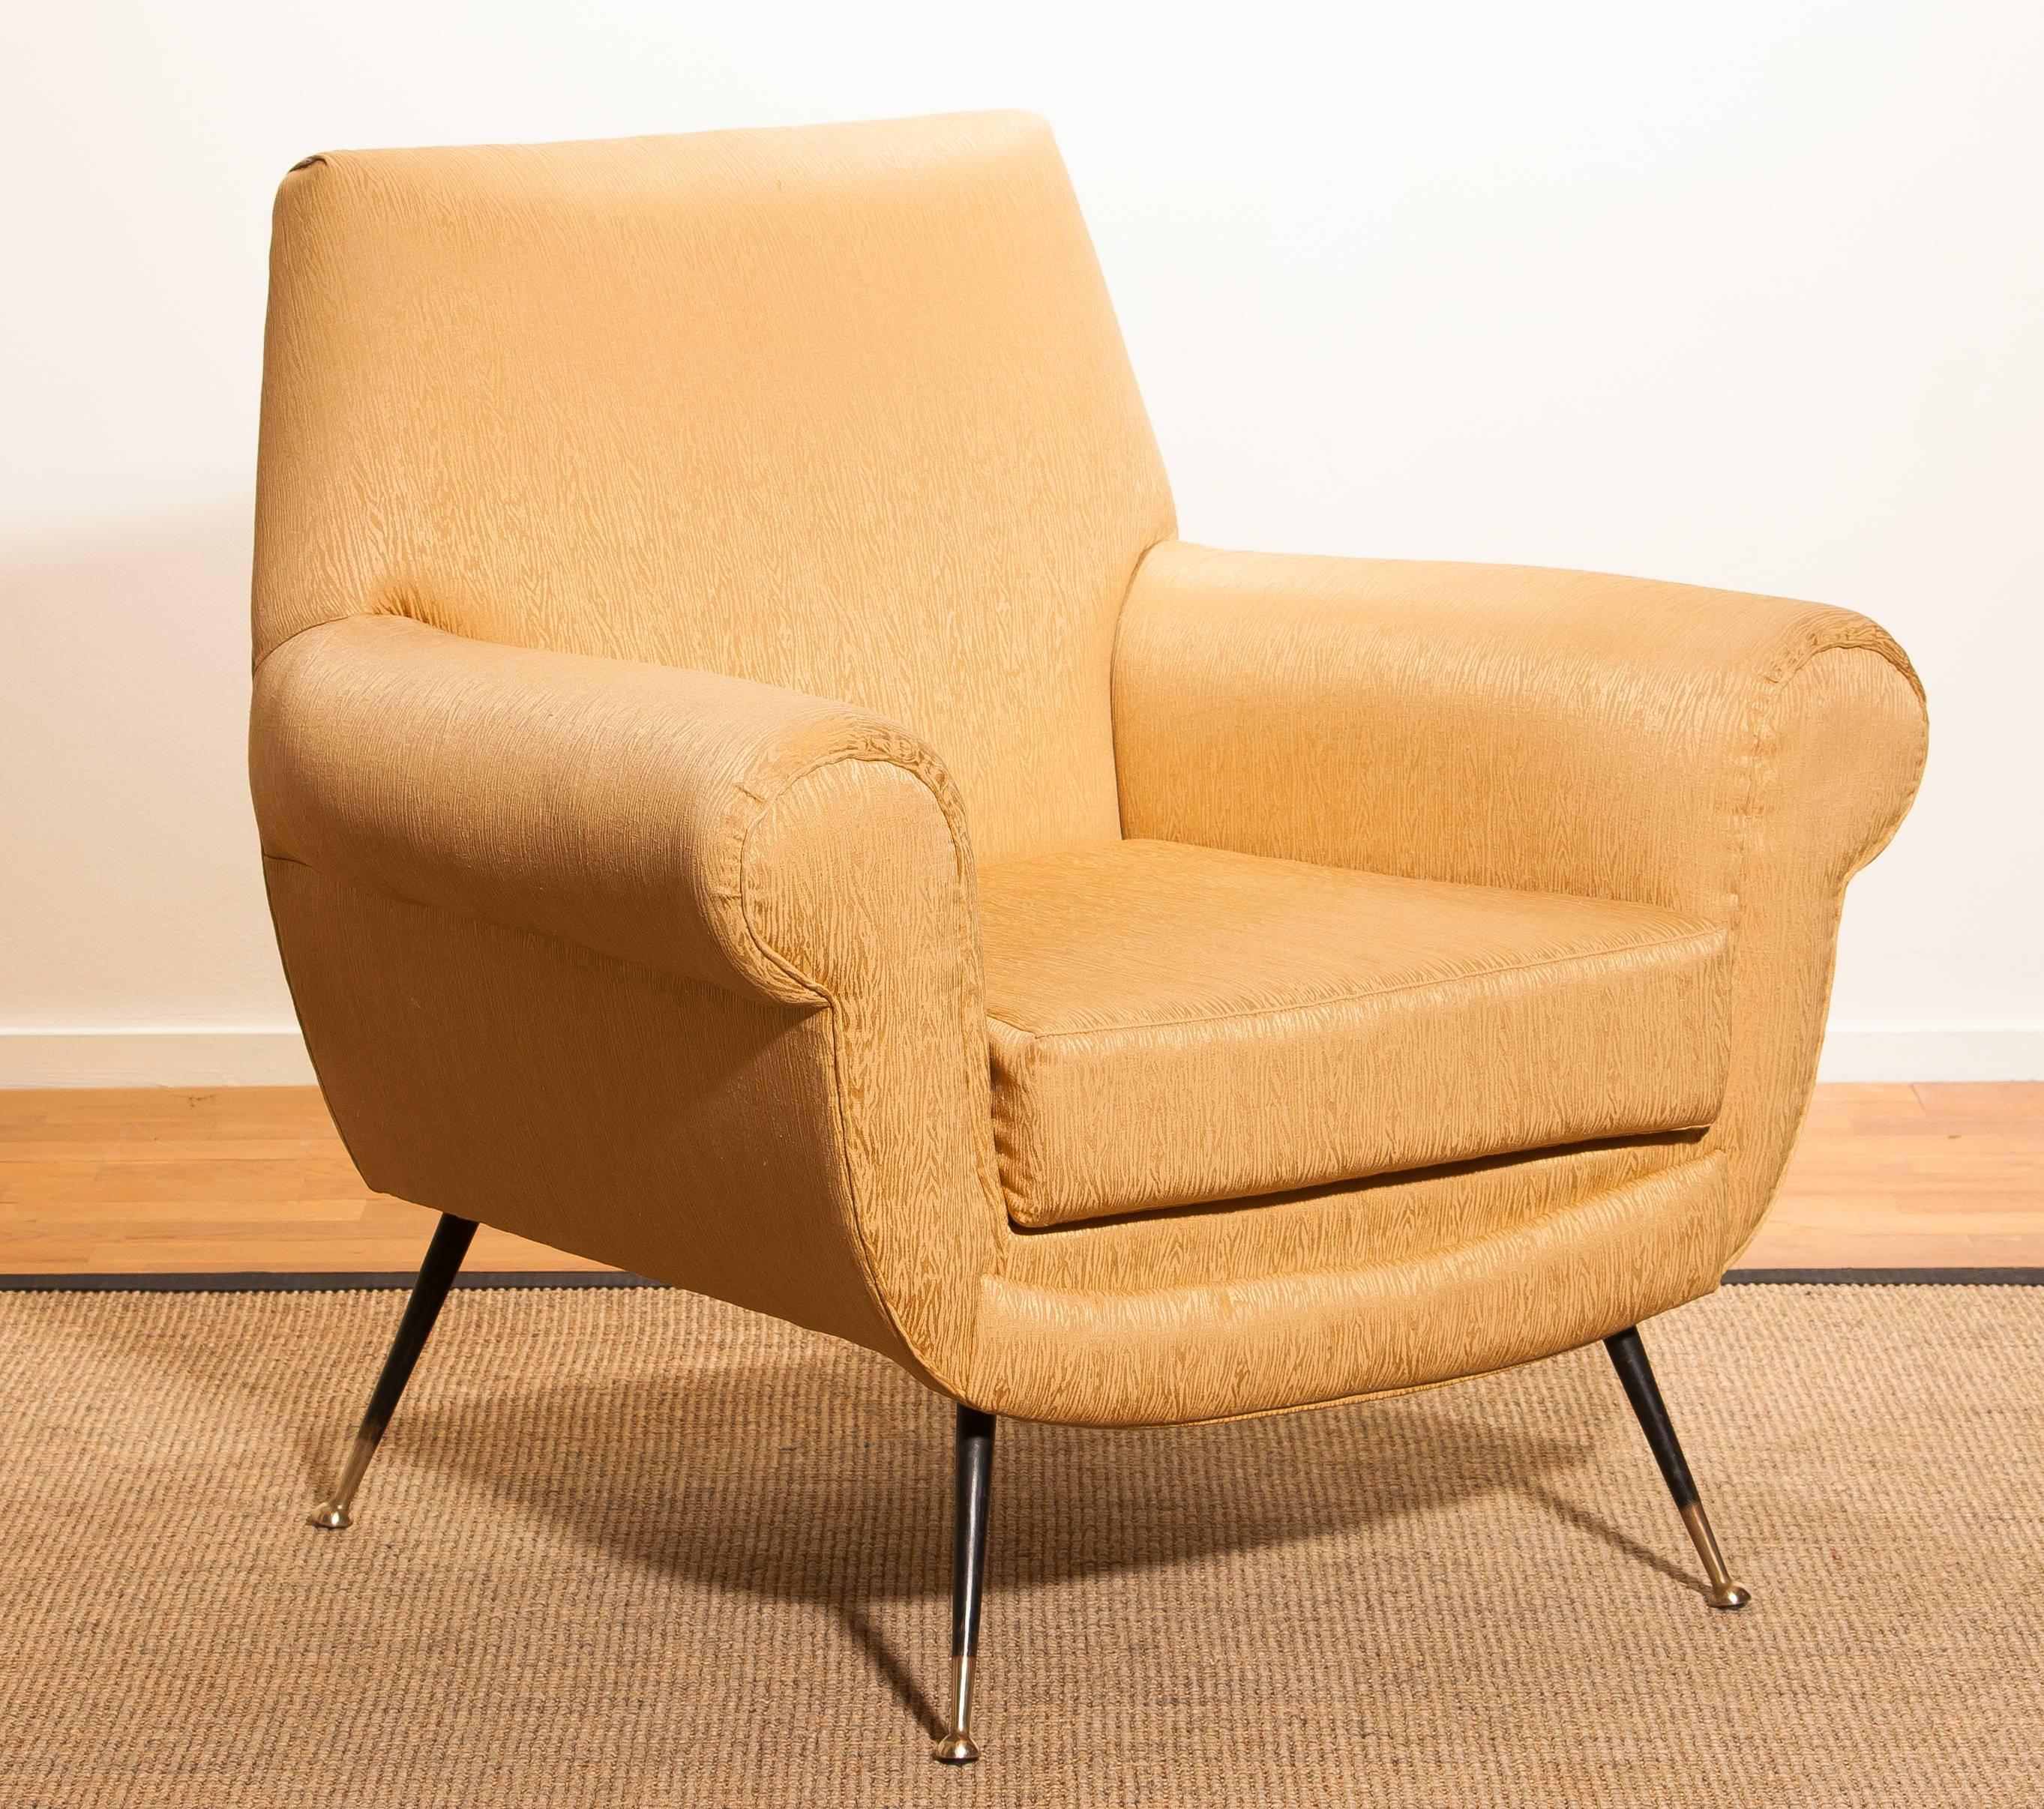 Beautiful and excellent Italian midcentury lounge chair of the 1950s. With the original brass stiletto legs and gold colored jacquard fabric (later period), all in perfect condition and with a extremely comfortable sit. Designed by Gigi Radice for